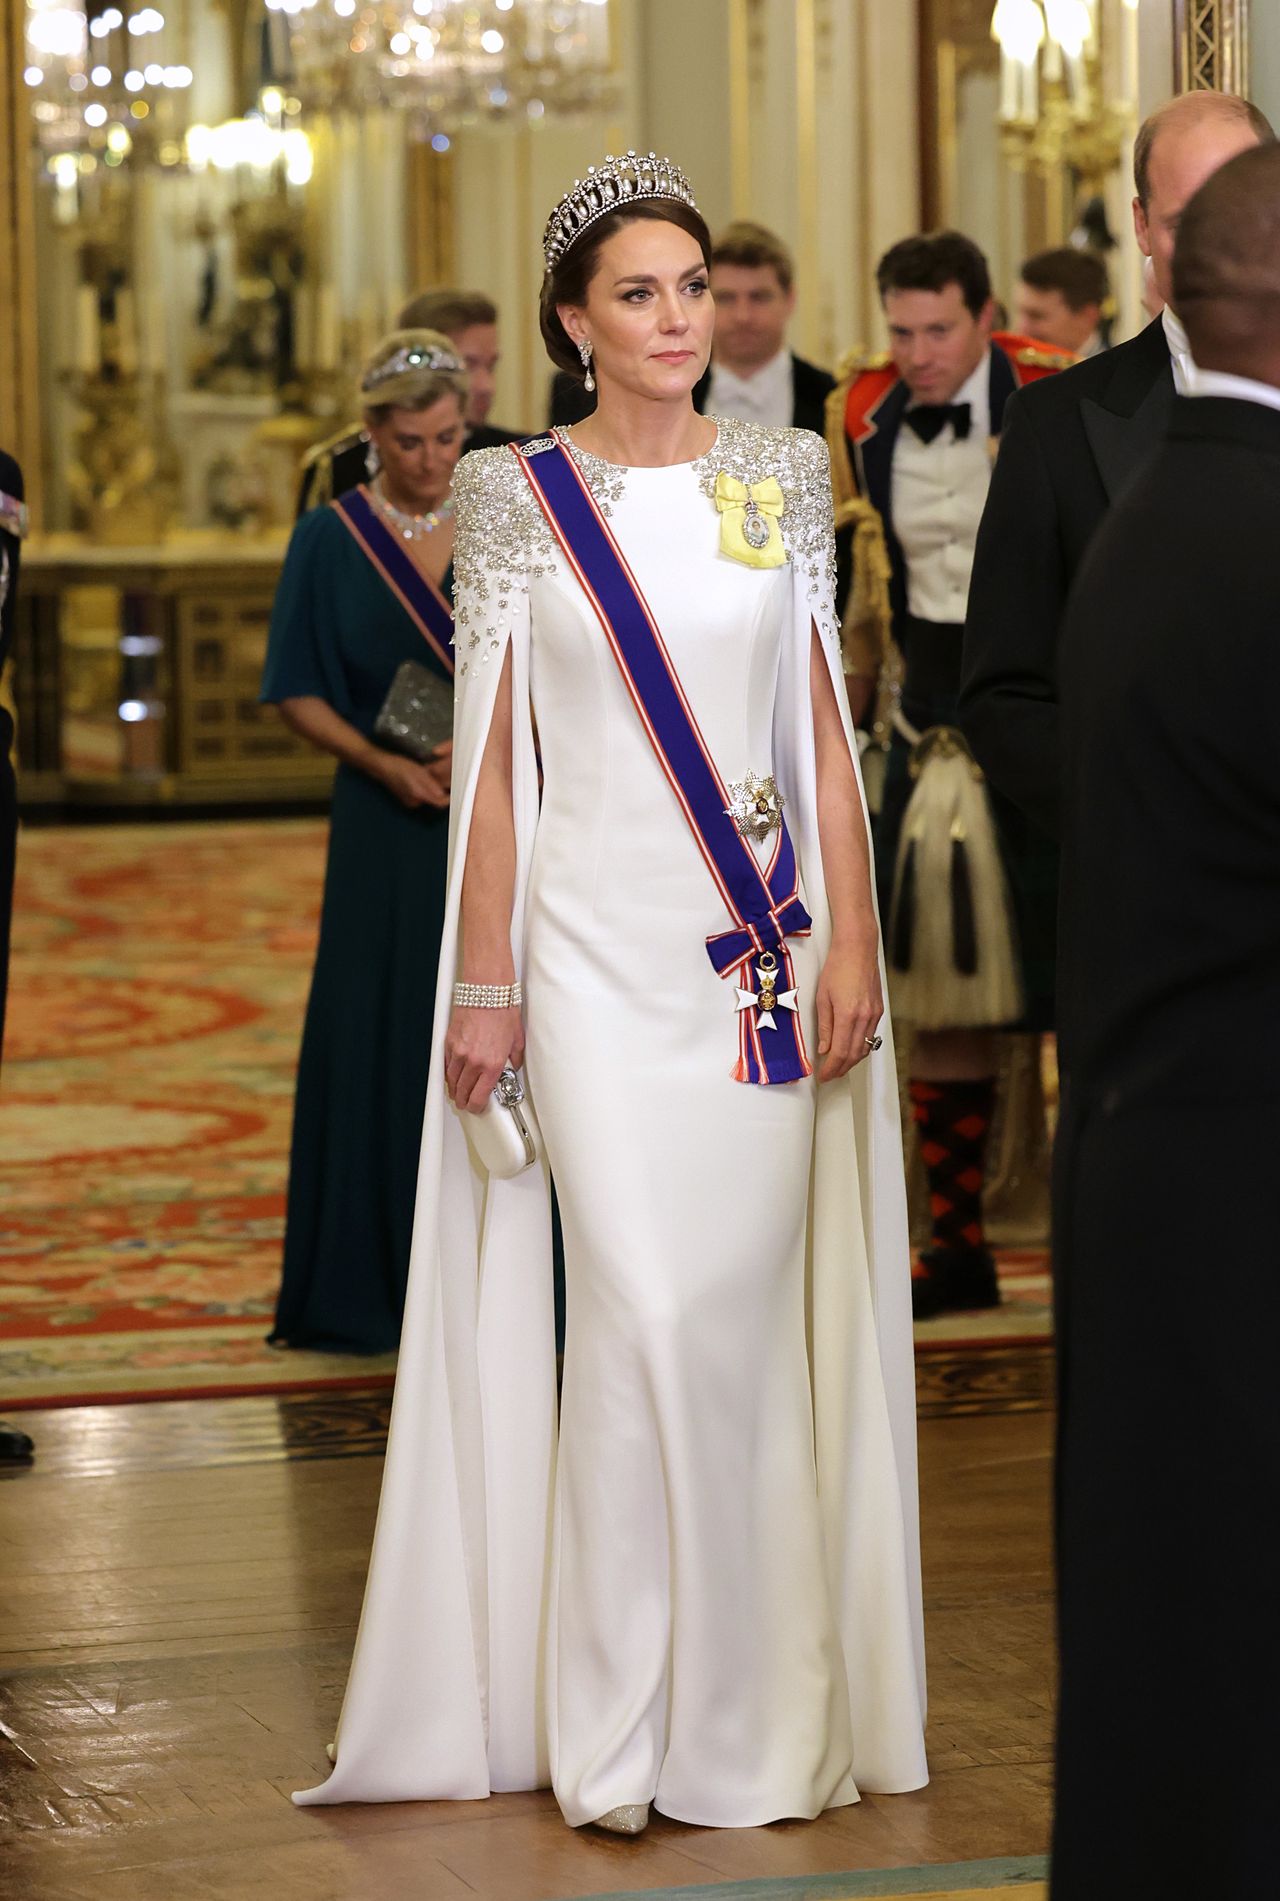 Duchess Kate at a banquet in Buckingham Palace